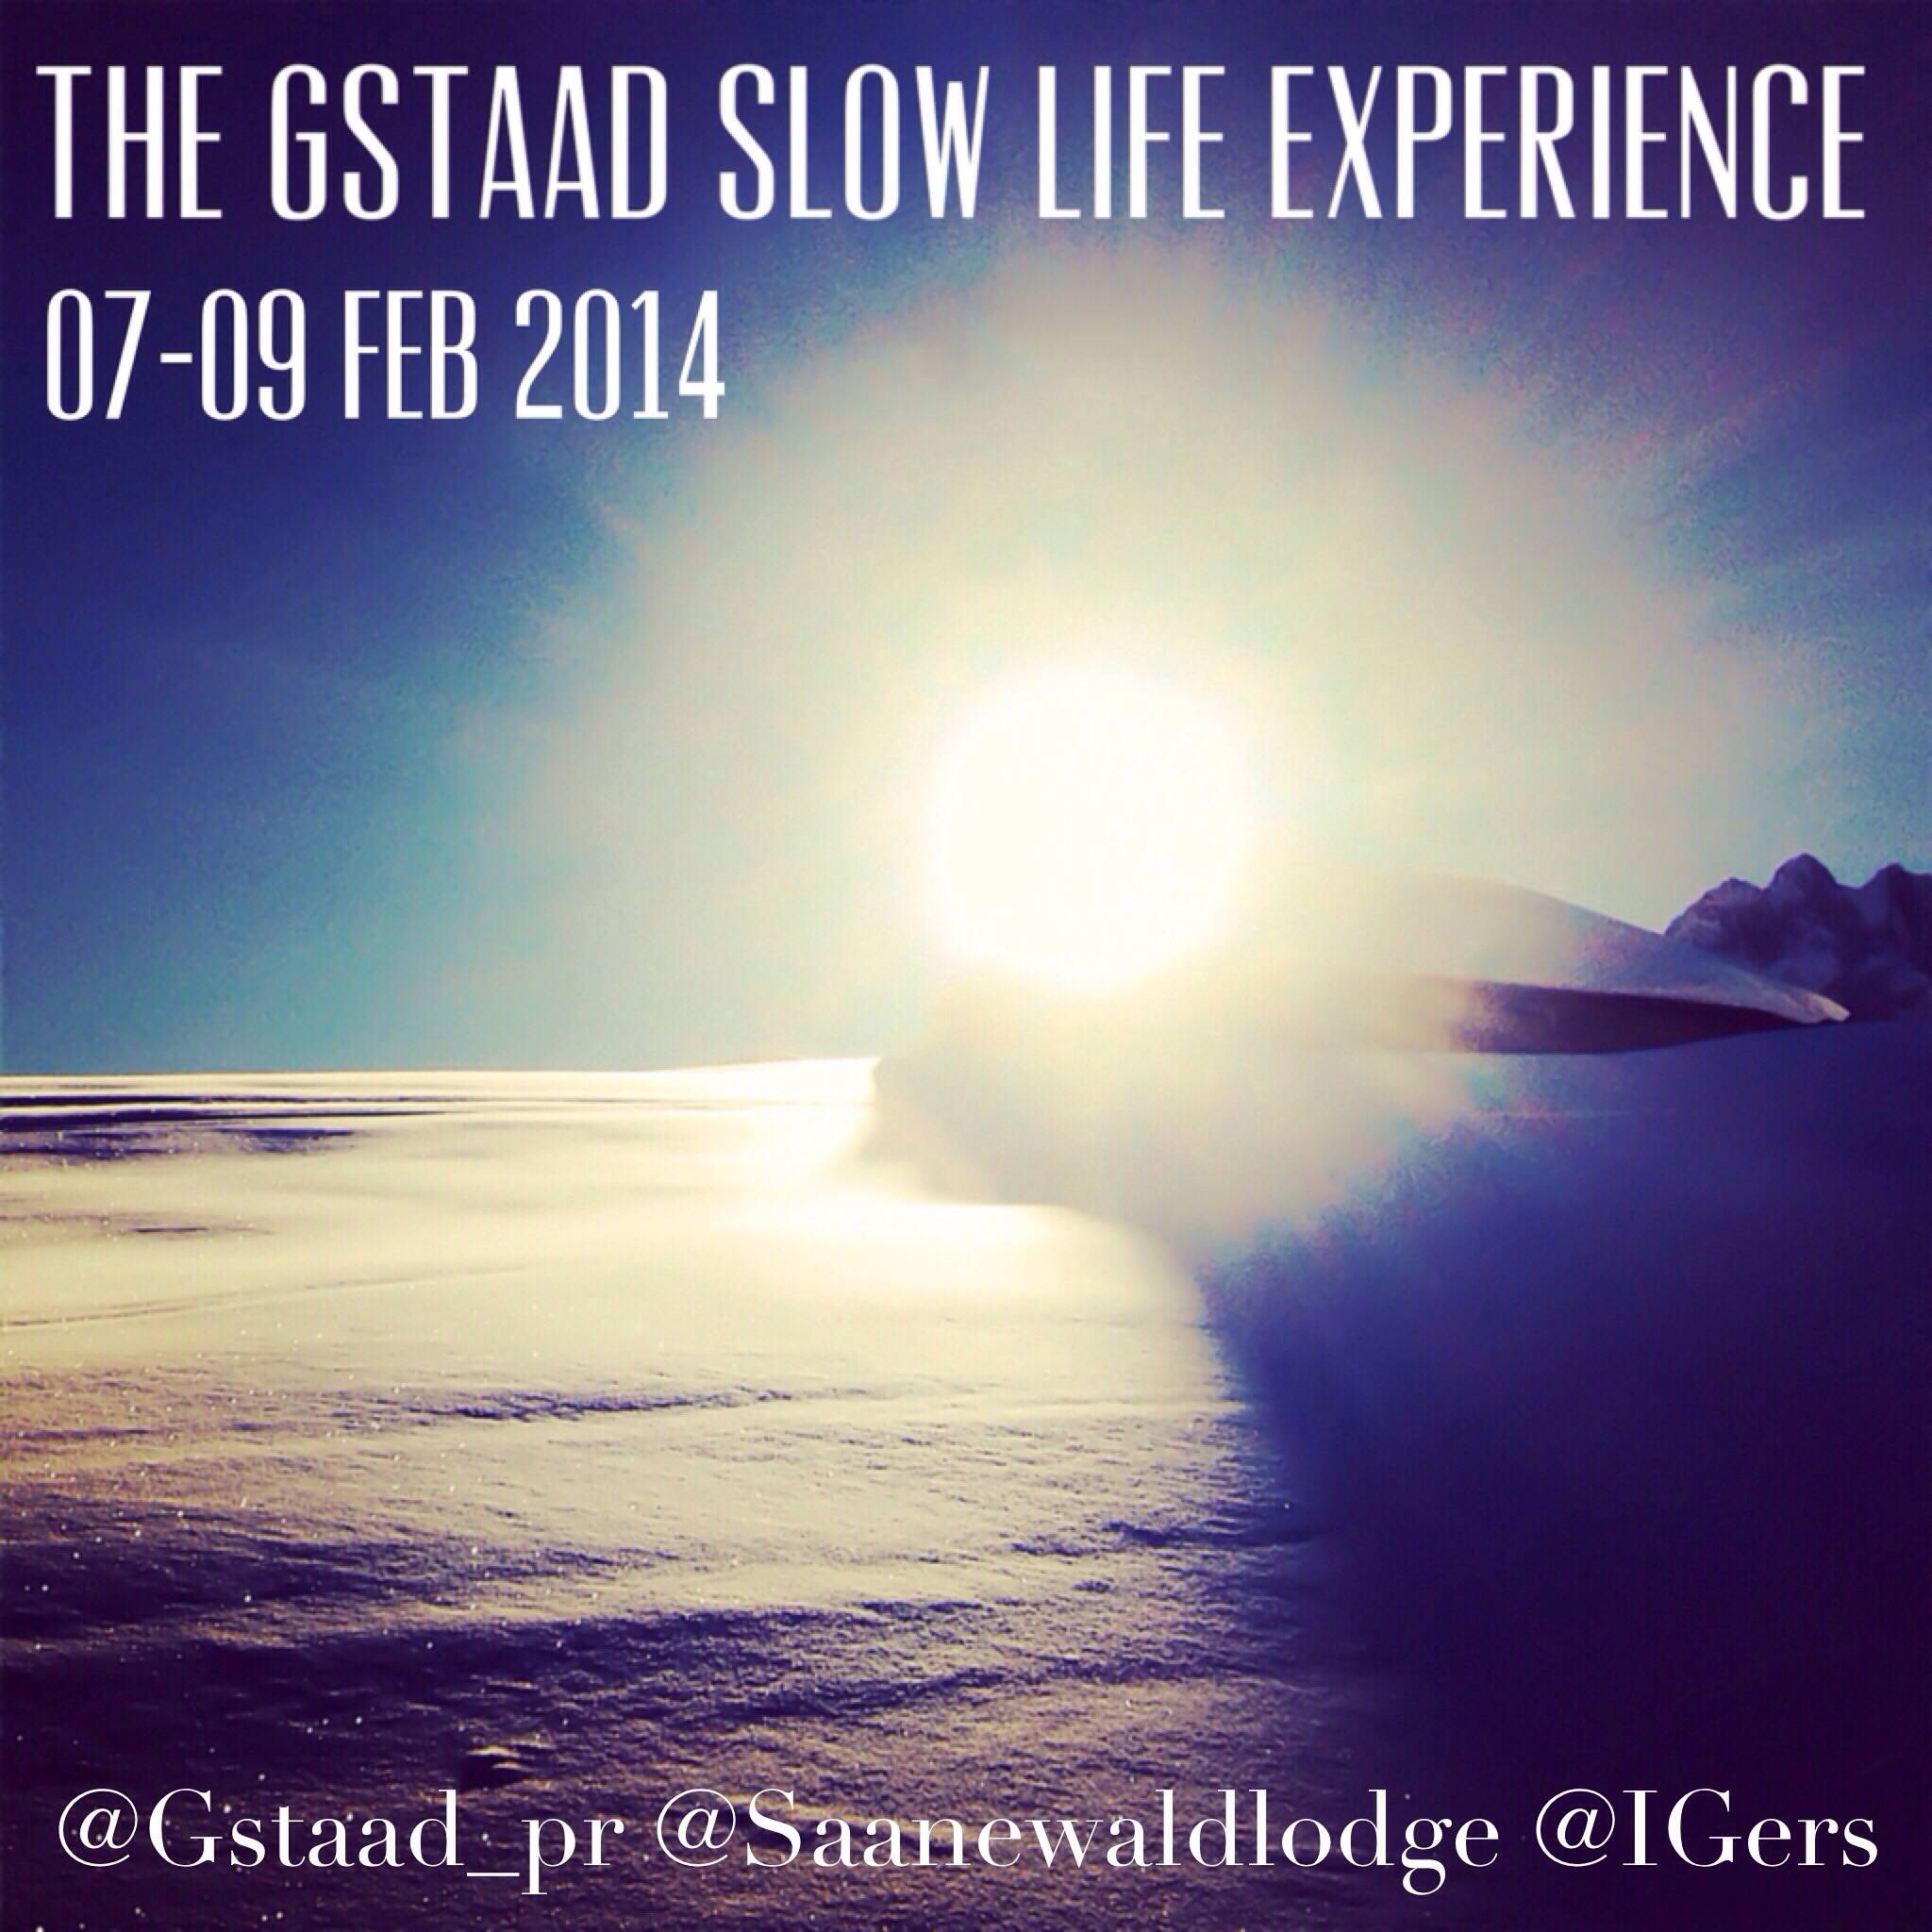 GSTAAD TOURISM, SAANEWALD LODGE AND INSTAGRAMERS